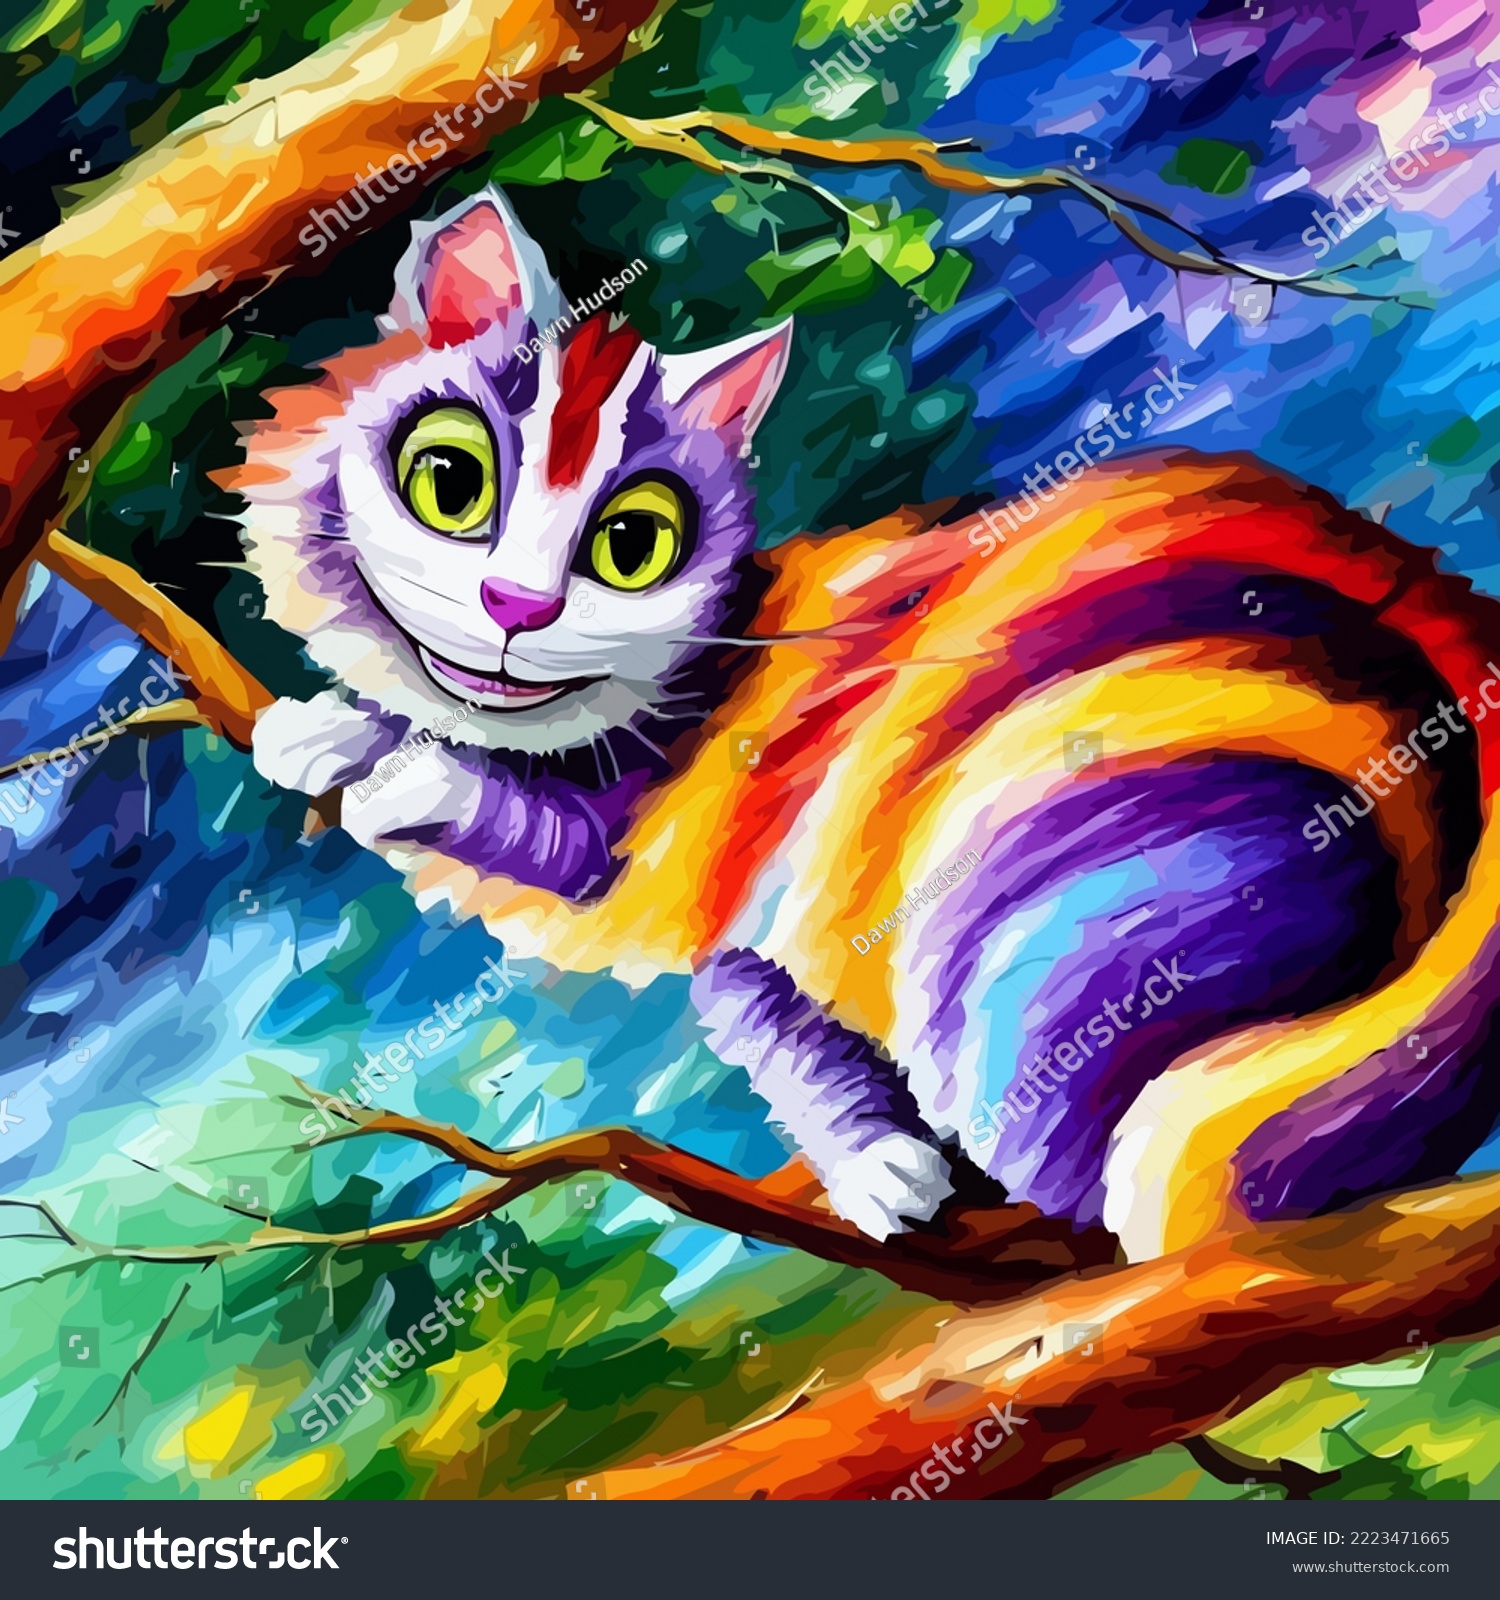 SVG of A colorful and vibrant portrait of a Cheshire cat resting in a tree, created with digital palette knife and brush stroke effects.
 svg